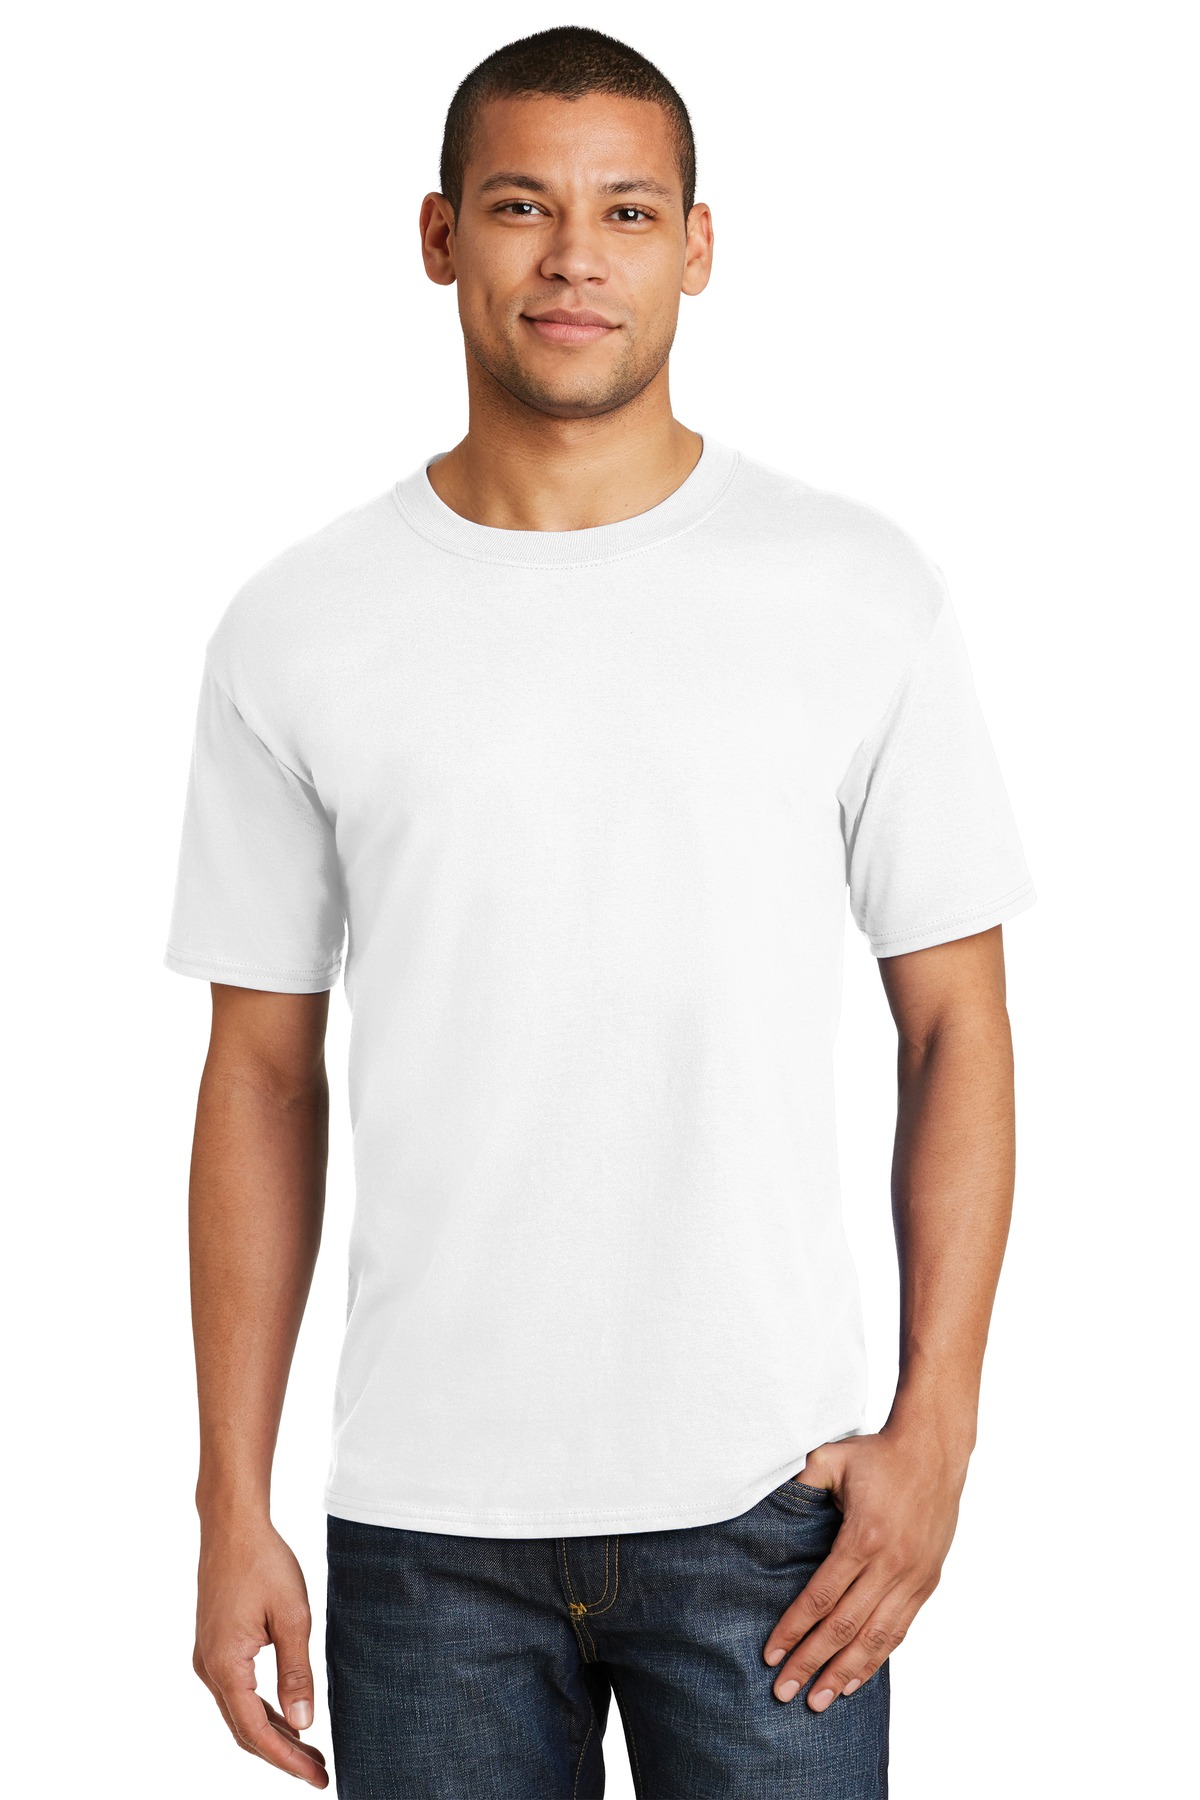 Hanes Beefy-T - 100% Cotton T-Shirt-